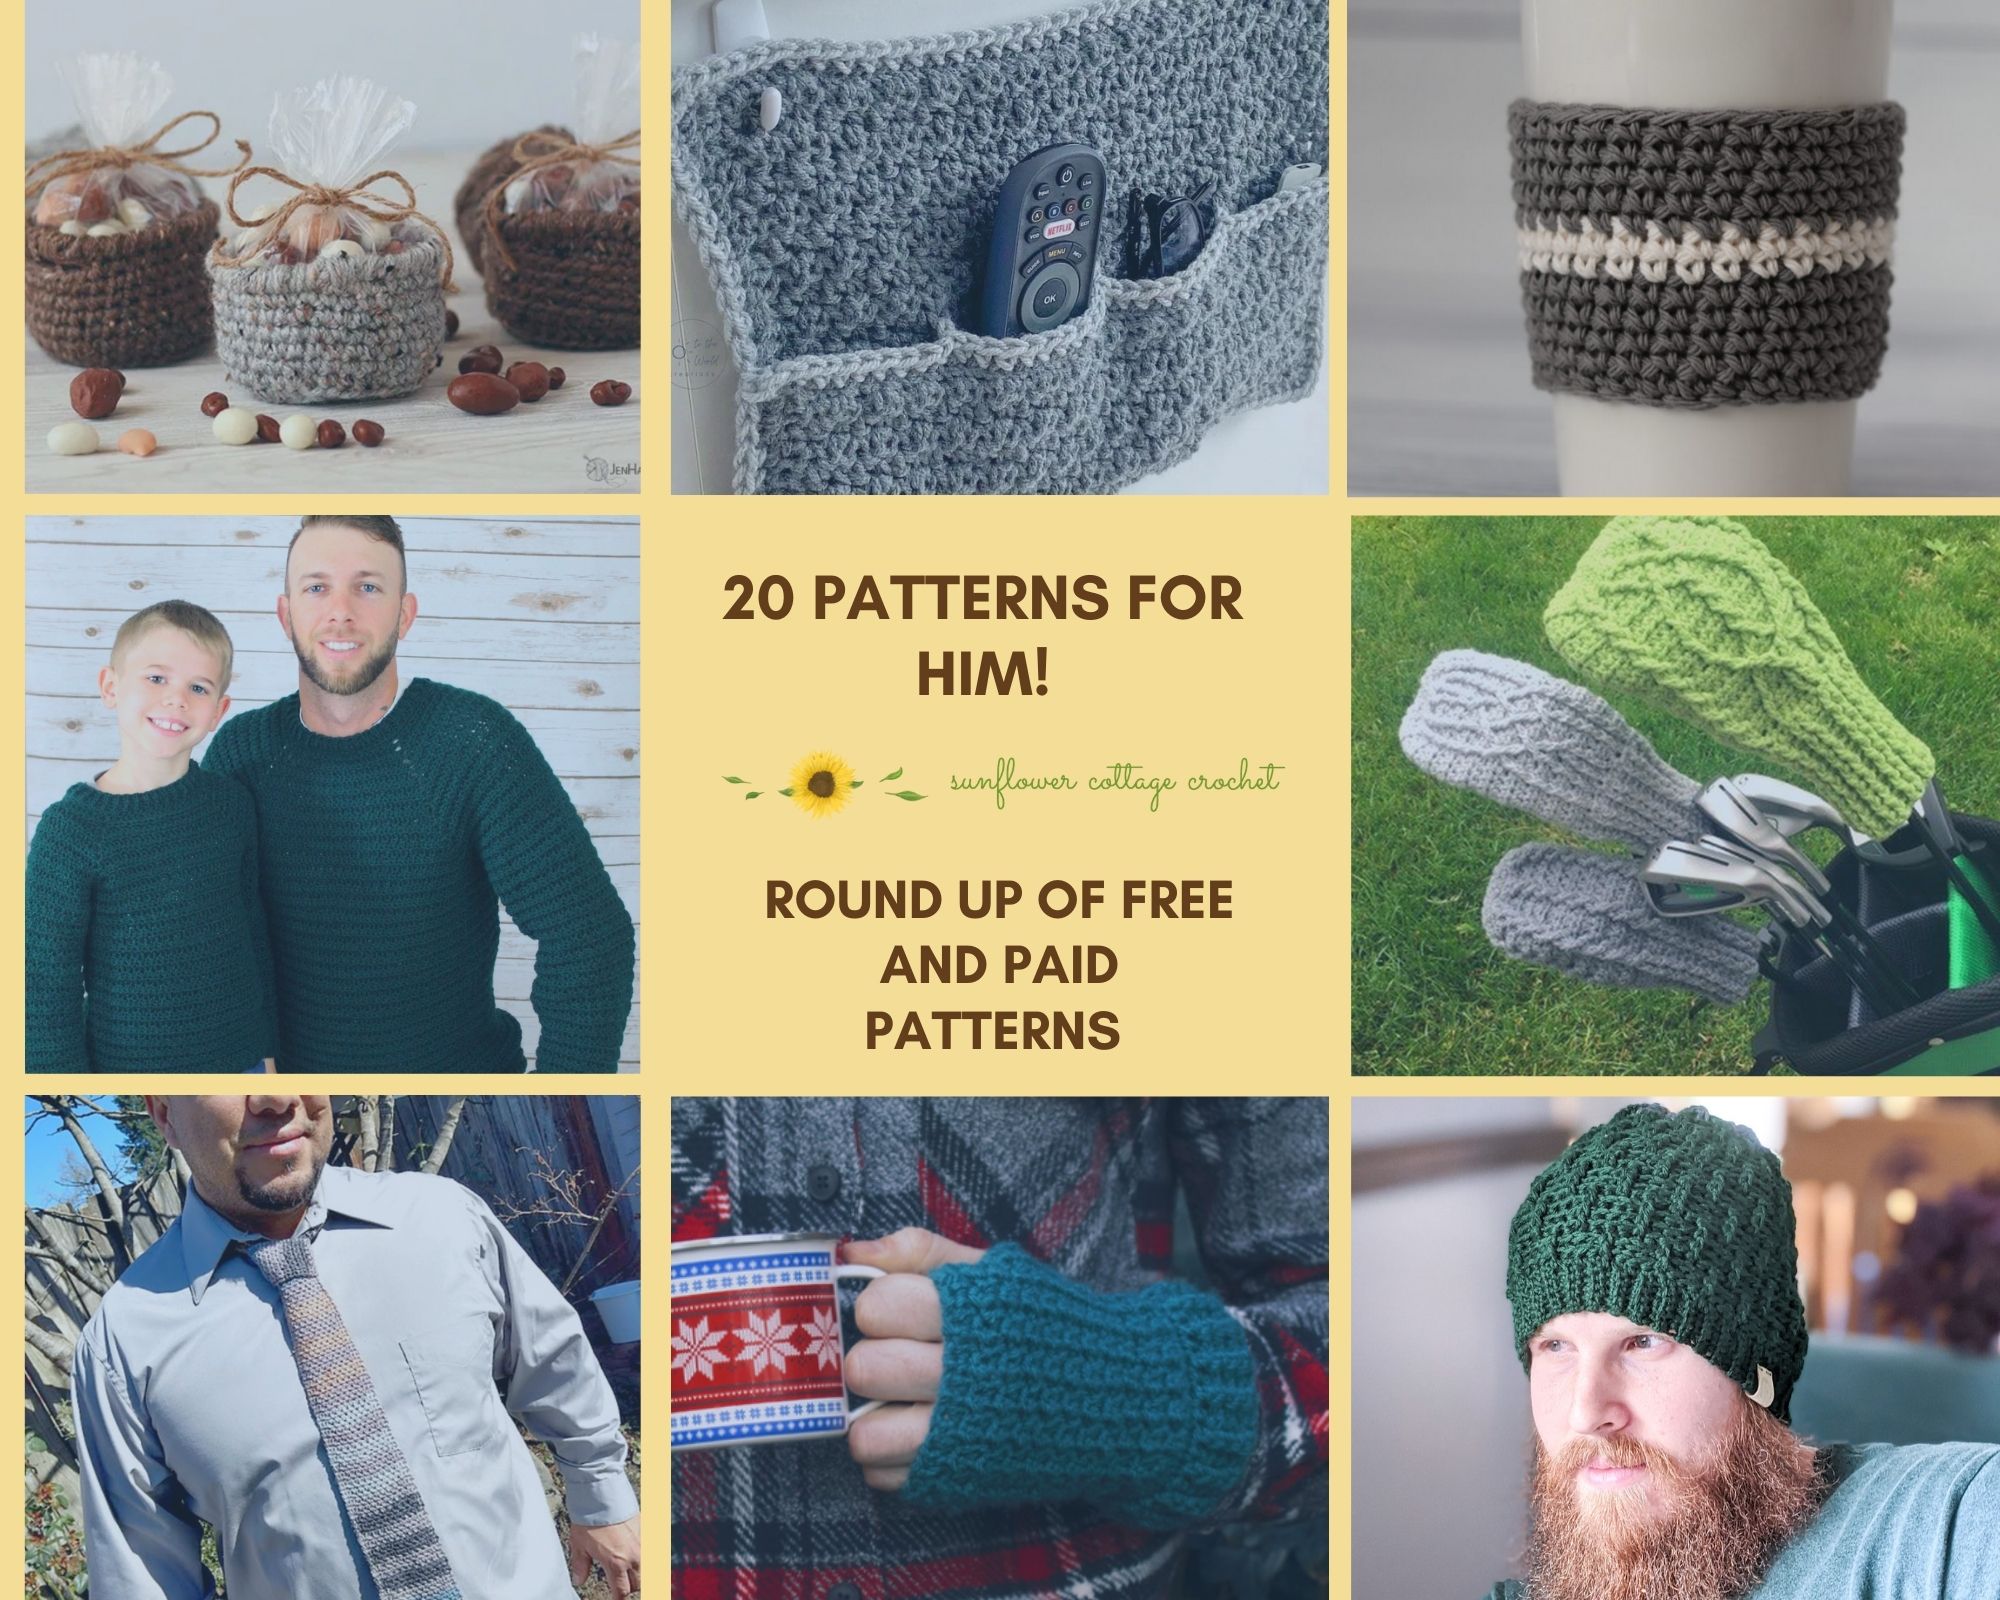 Round up of Patterns for Him!